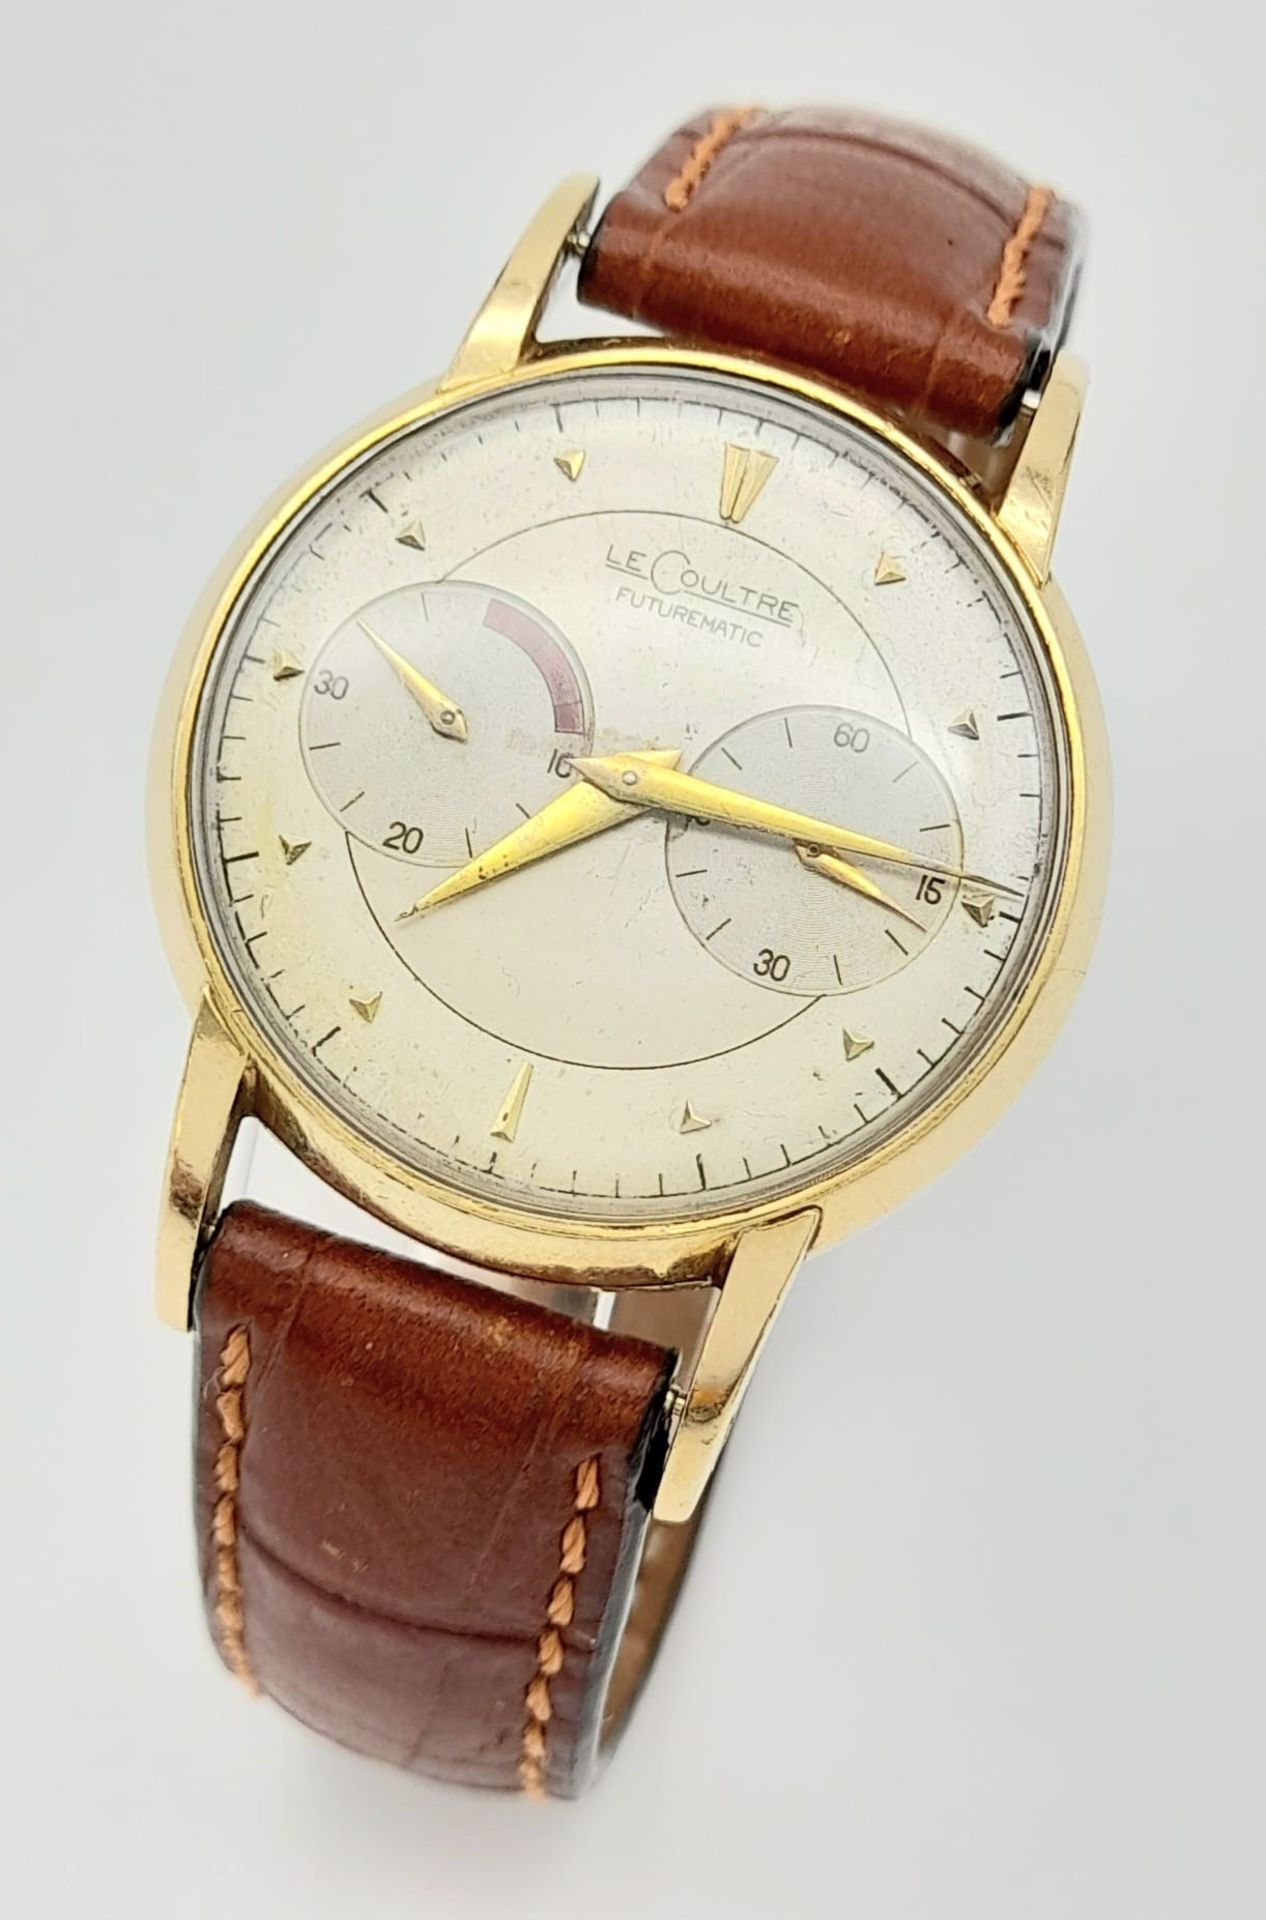 A Vintage Jaeger Le Coultre Futurematic Gents Watch.Brown leather strap. Case - 35mm. White dial